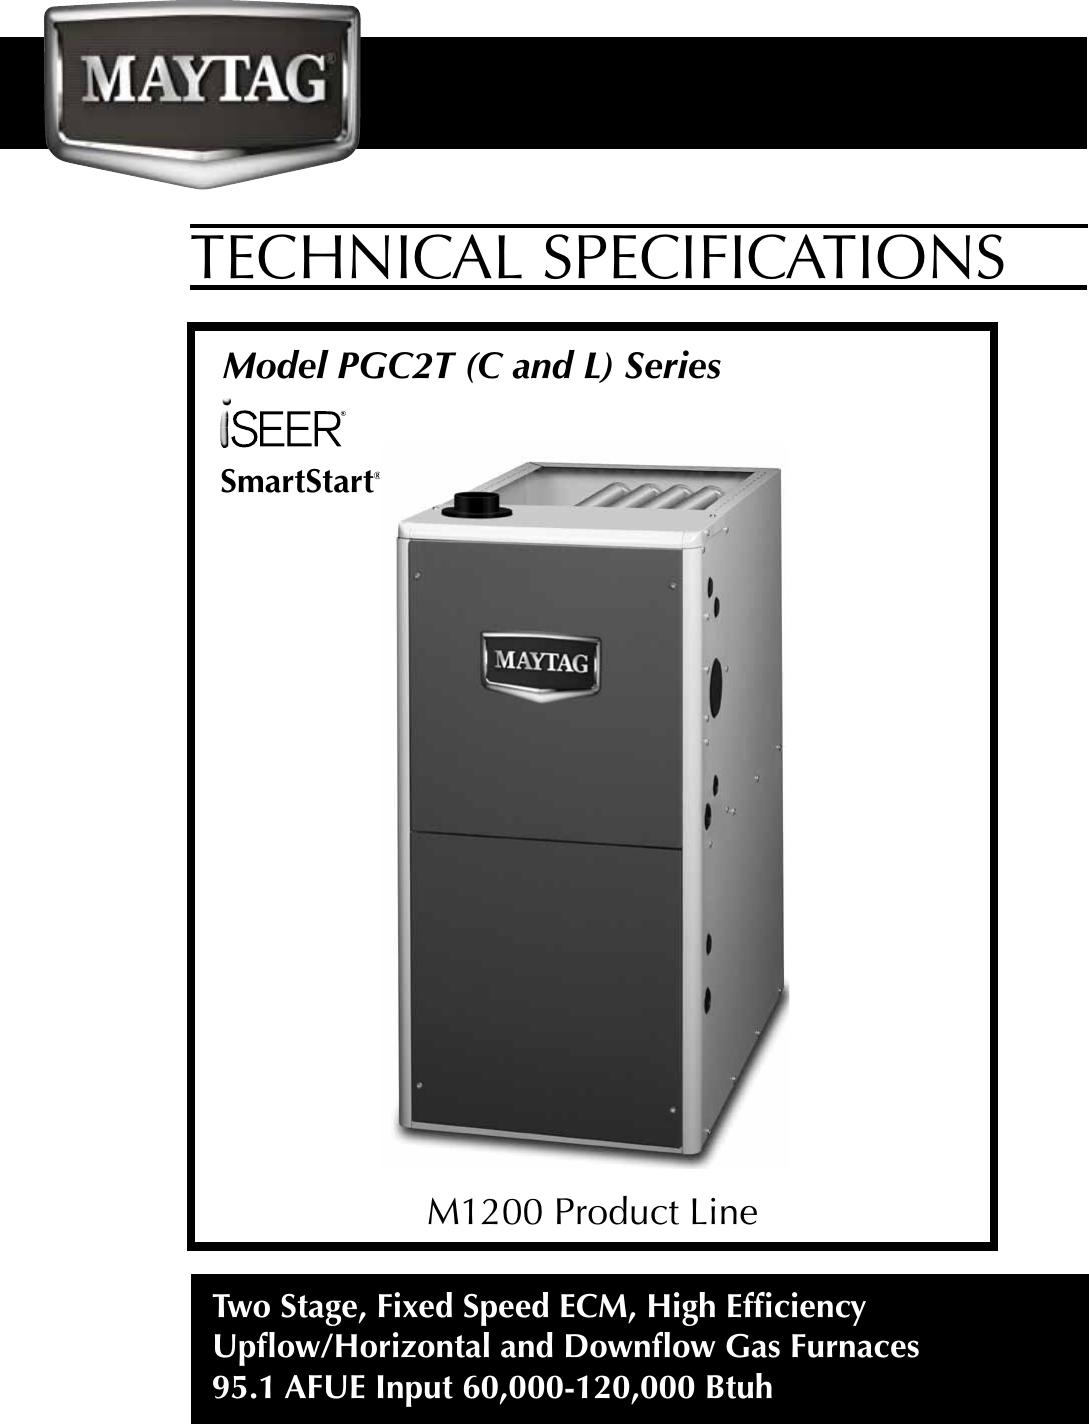 Page 1 of 8 - Maytag Maytag-Pgc2Tc-Pgc2Tl-Maytag-M1200-95-1-Afue-Two-Stage-Fixed-Speed-Gas-Furnace-Technical-Literature- PGC2T(C,L) Series Gas Furnaces Technical Specifications  Maytag-pgc2tc-pgc2tl-maytag-m1200-95-1-afue-two-stage-fixed-speed-gas-furnace-technical-literature